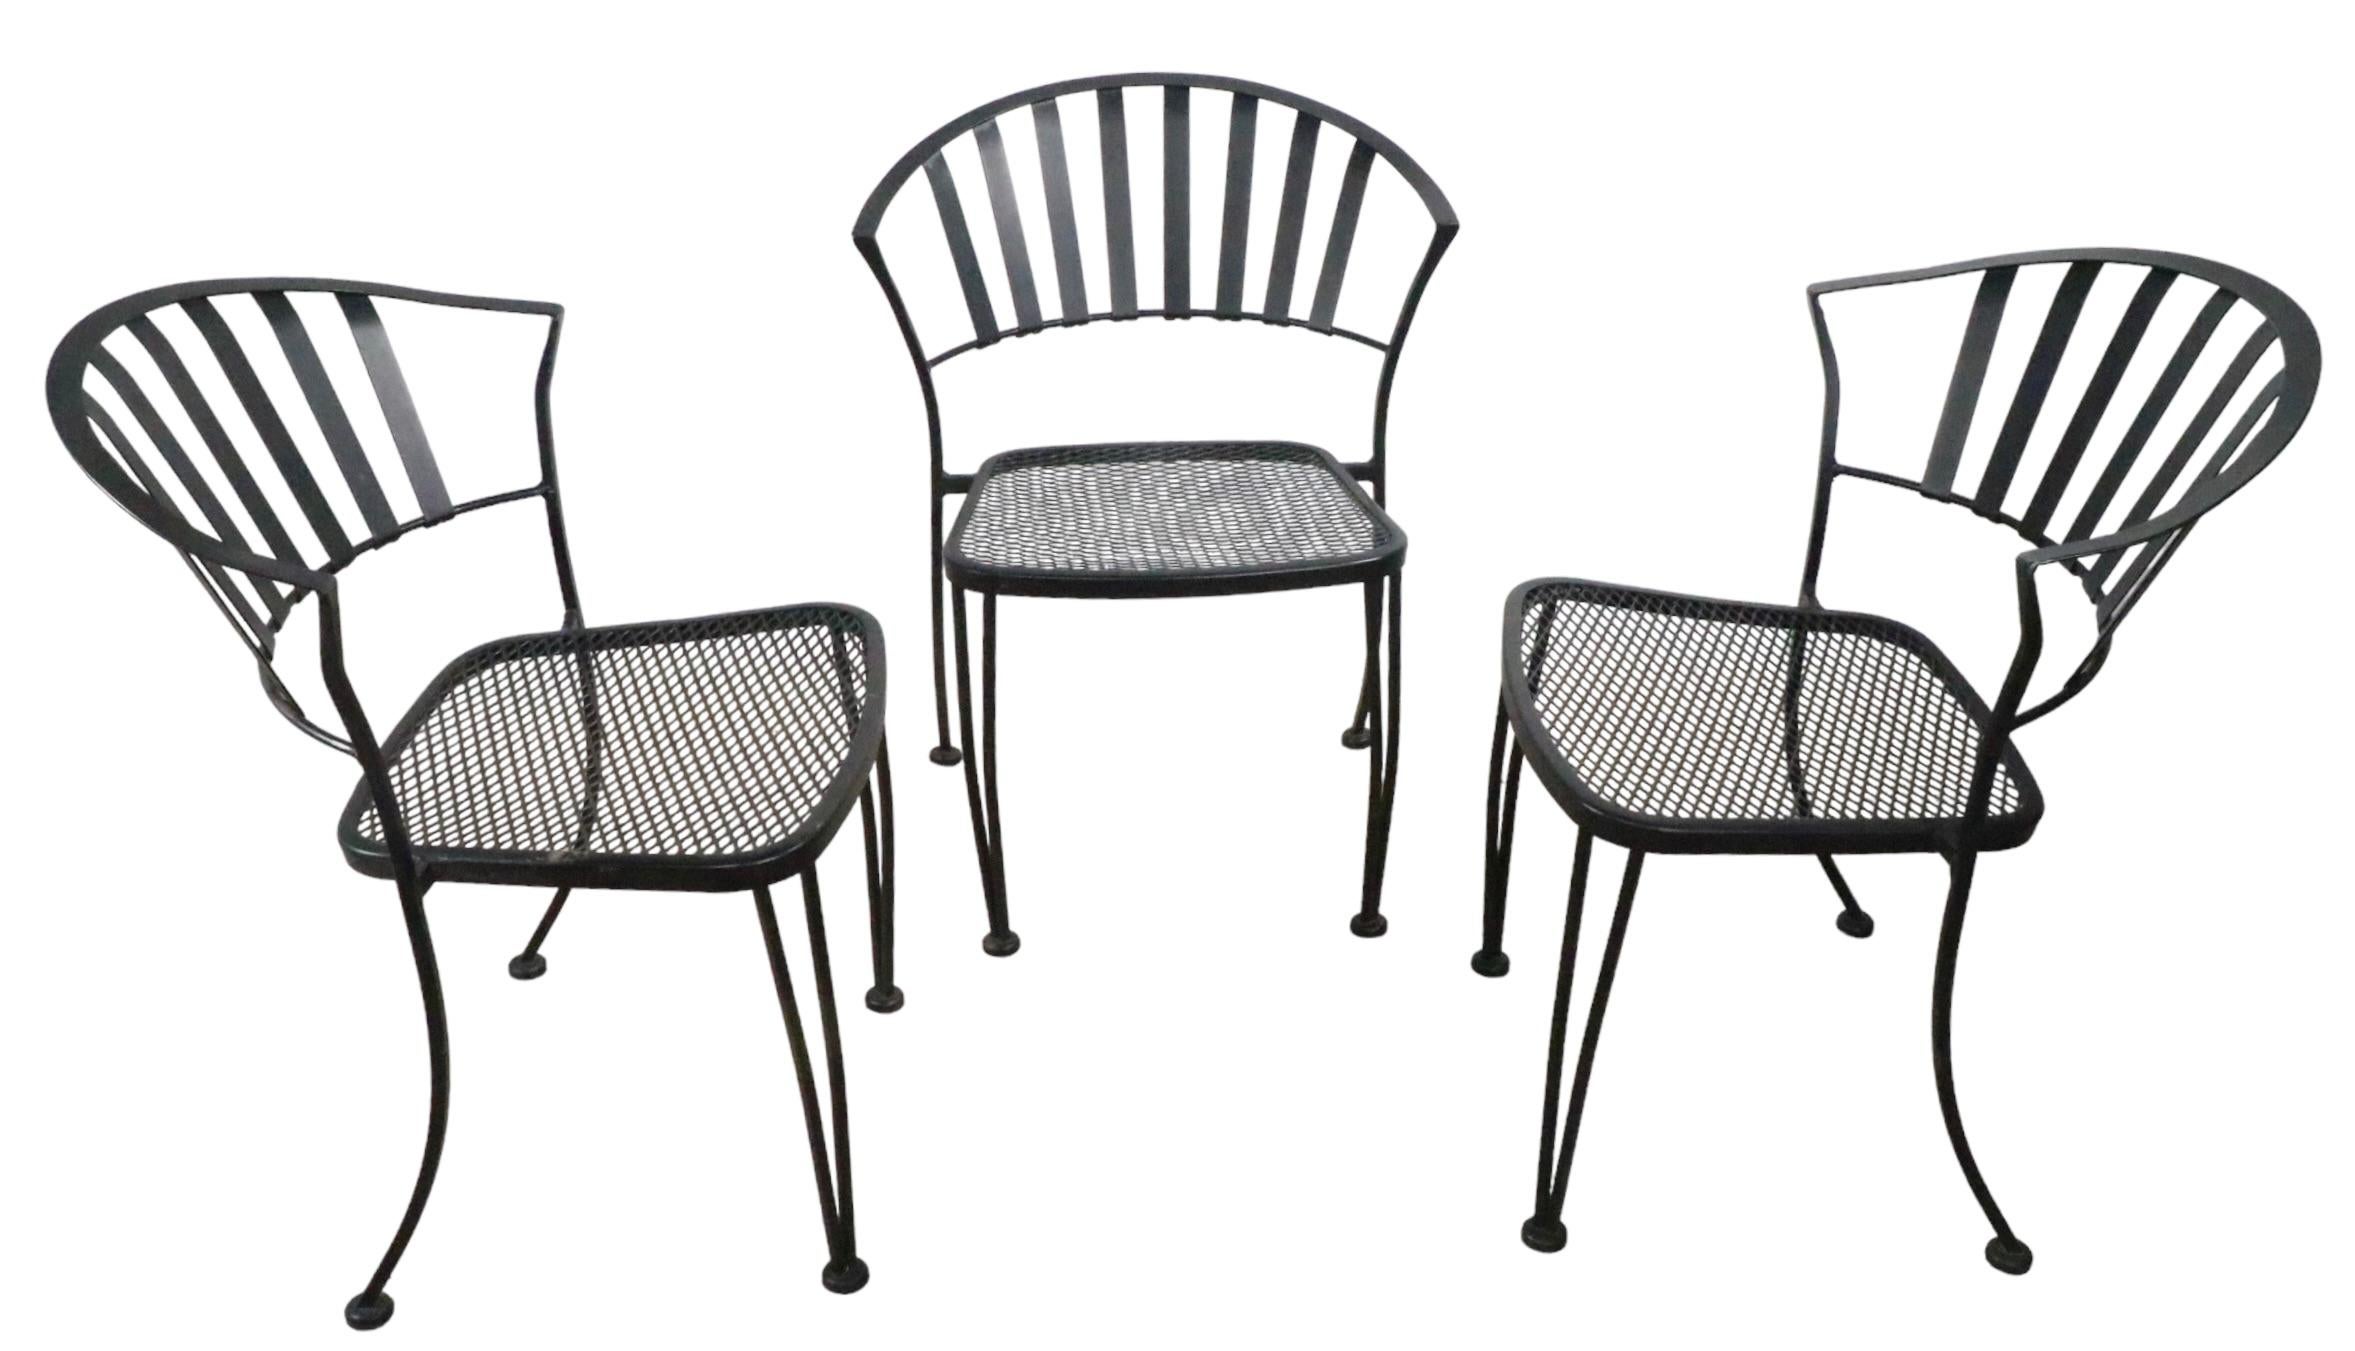 American Set of Four Vintage Garden Patio Poolside Metal Strap Dining Chairs For Sale